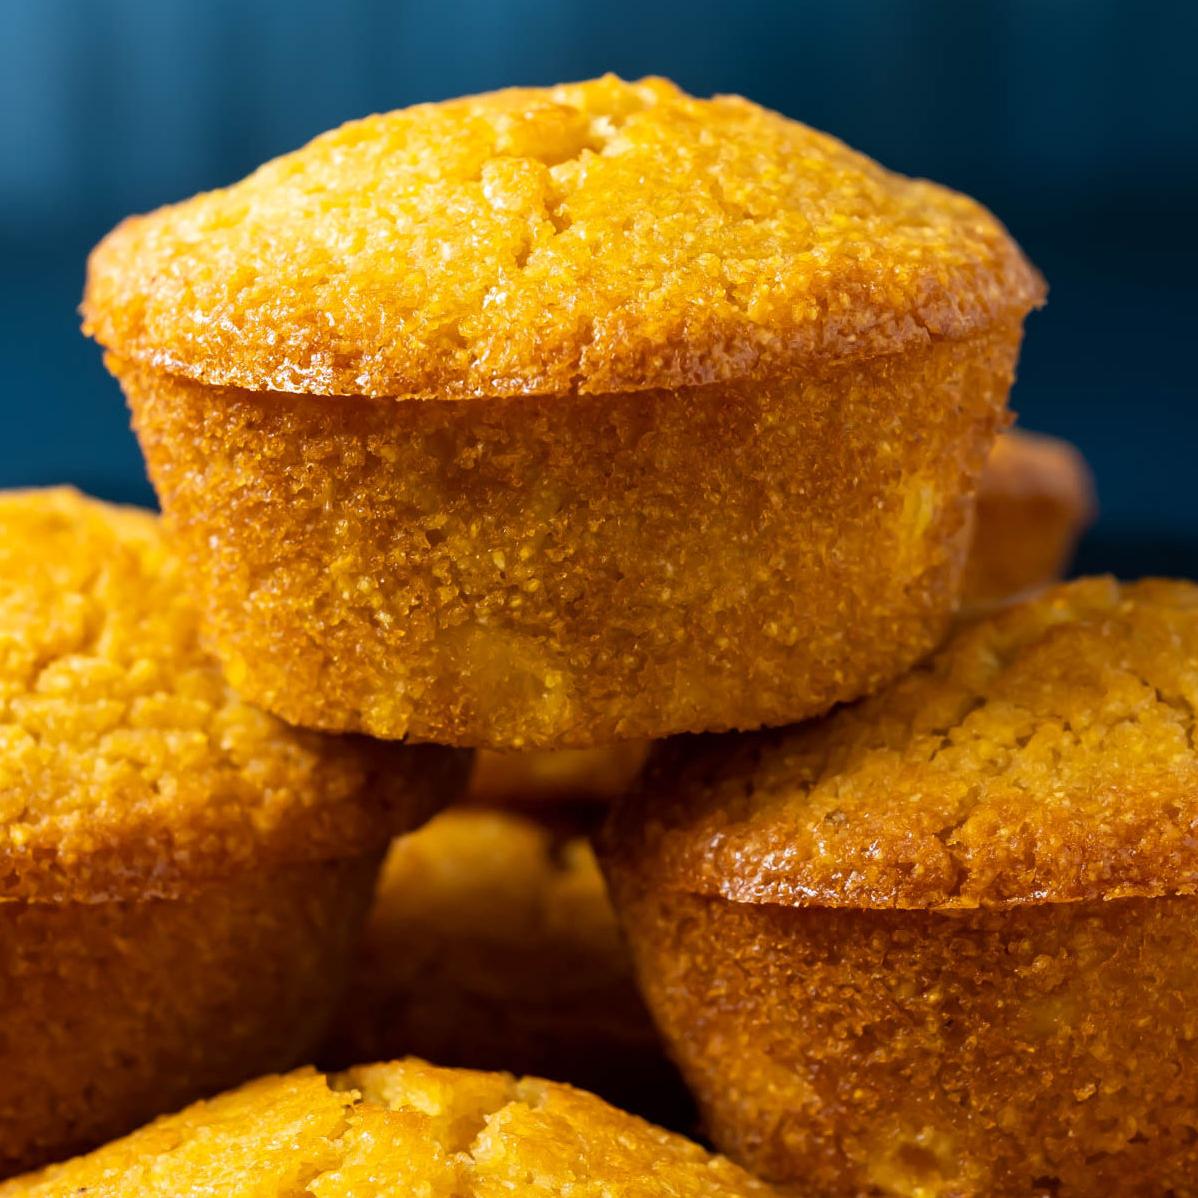  The golden brown crust contrasts perfectly with the soft, tender interior of this vegan cornbread.